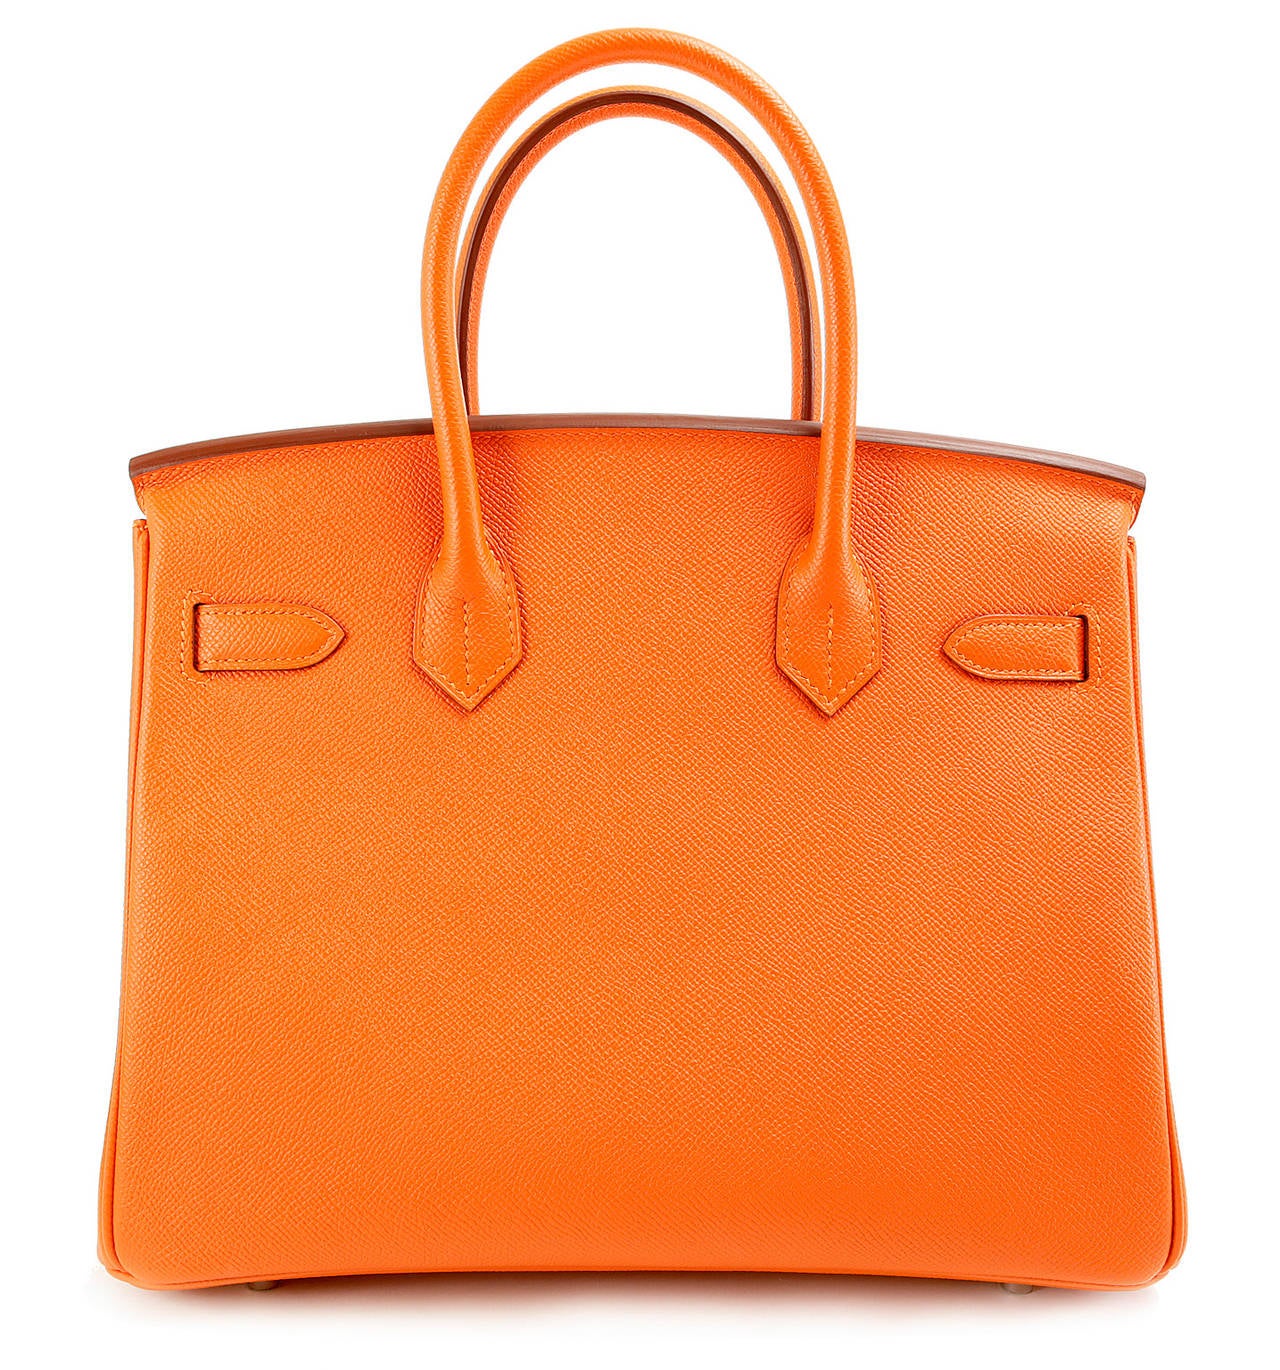 Hermès  Orange Epsom 30cm Birkin Bag- PRISTINE unworn condition with the protective plastic attached to the hardware. 
The combination of Orange leather with Palladium is a highly sought after pairing adding a perfect punch of color to any